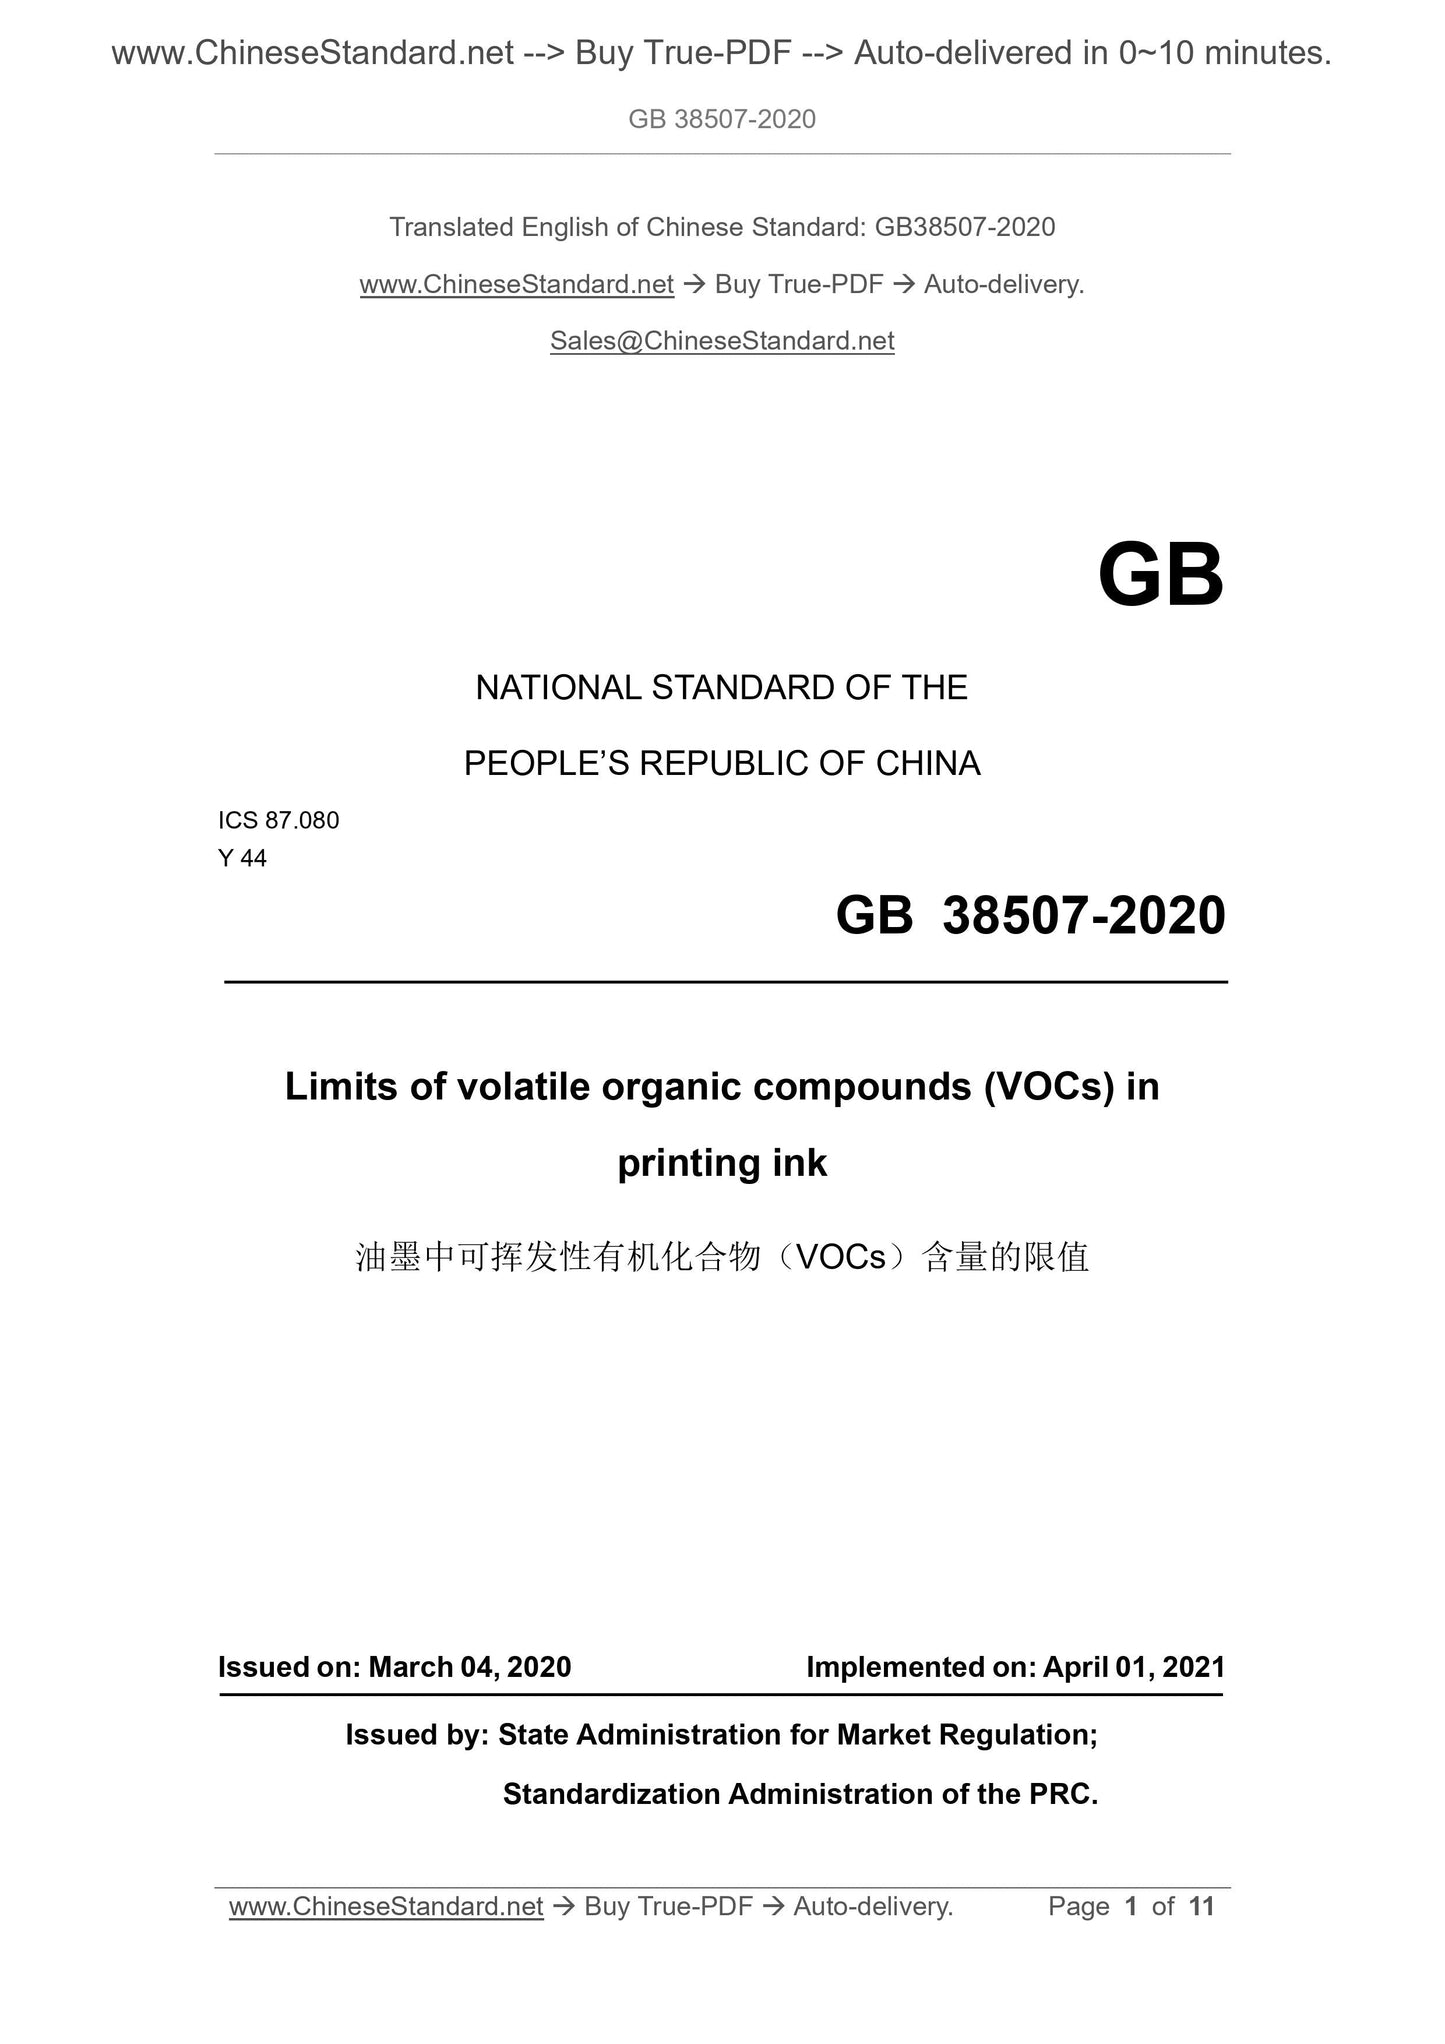 GB 38507-2020 Page 1